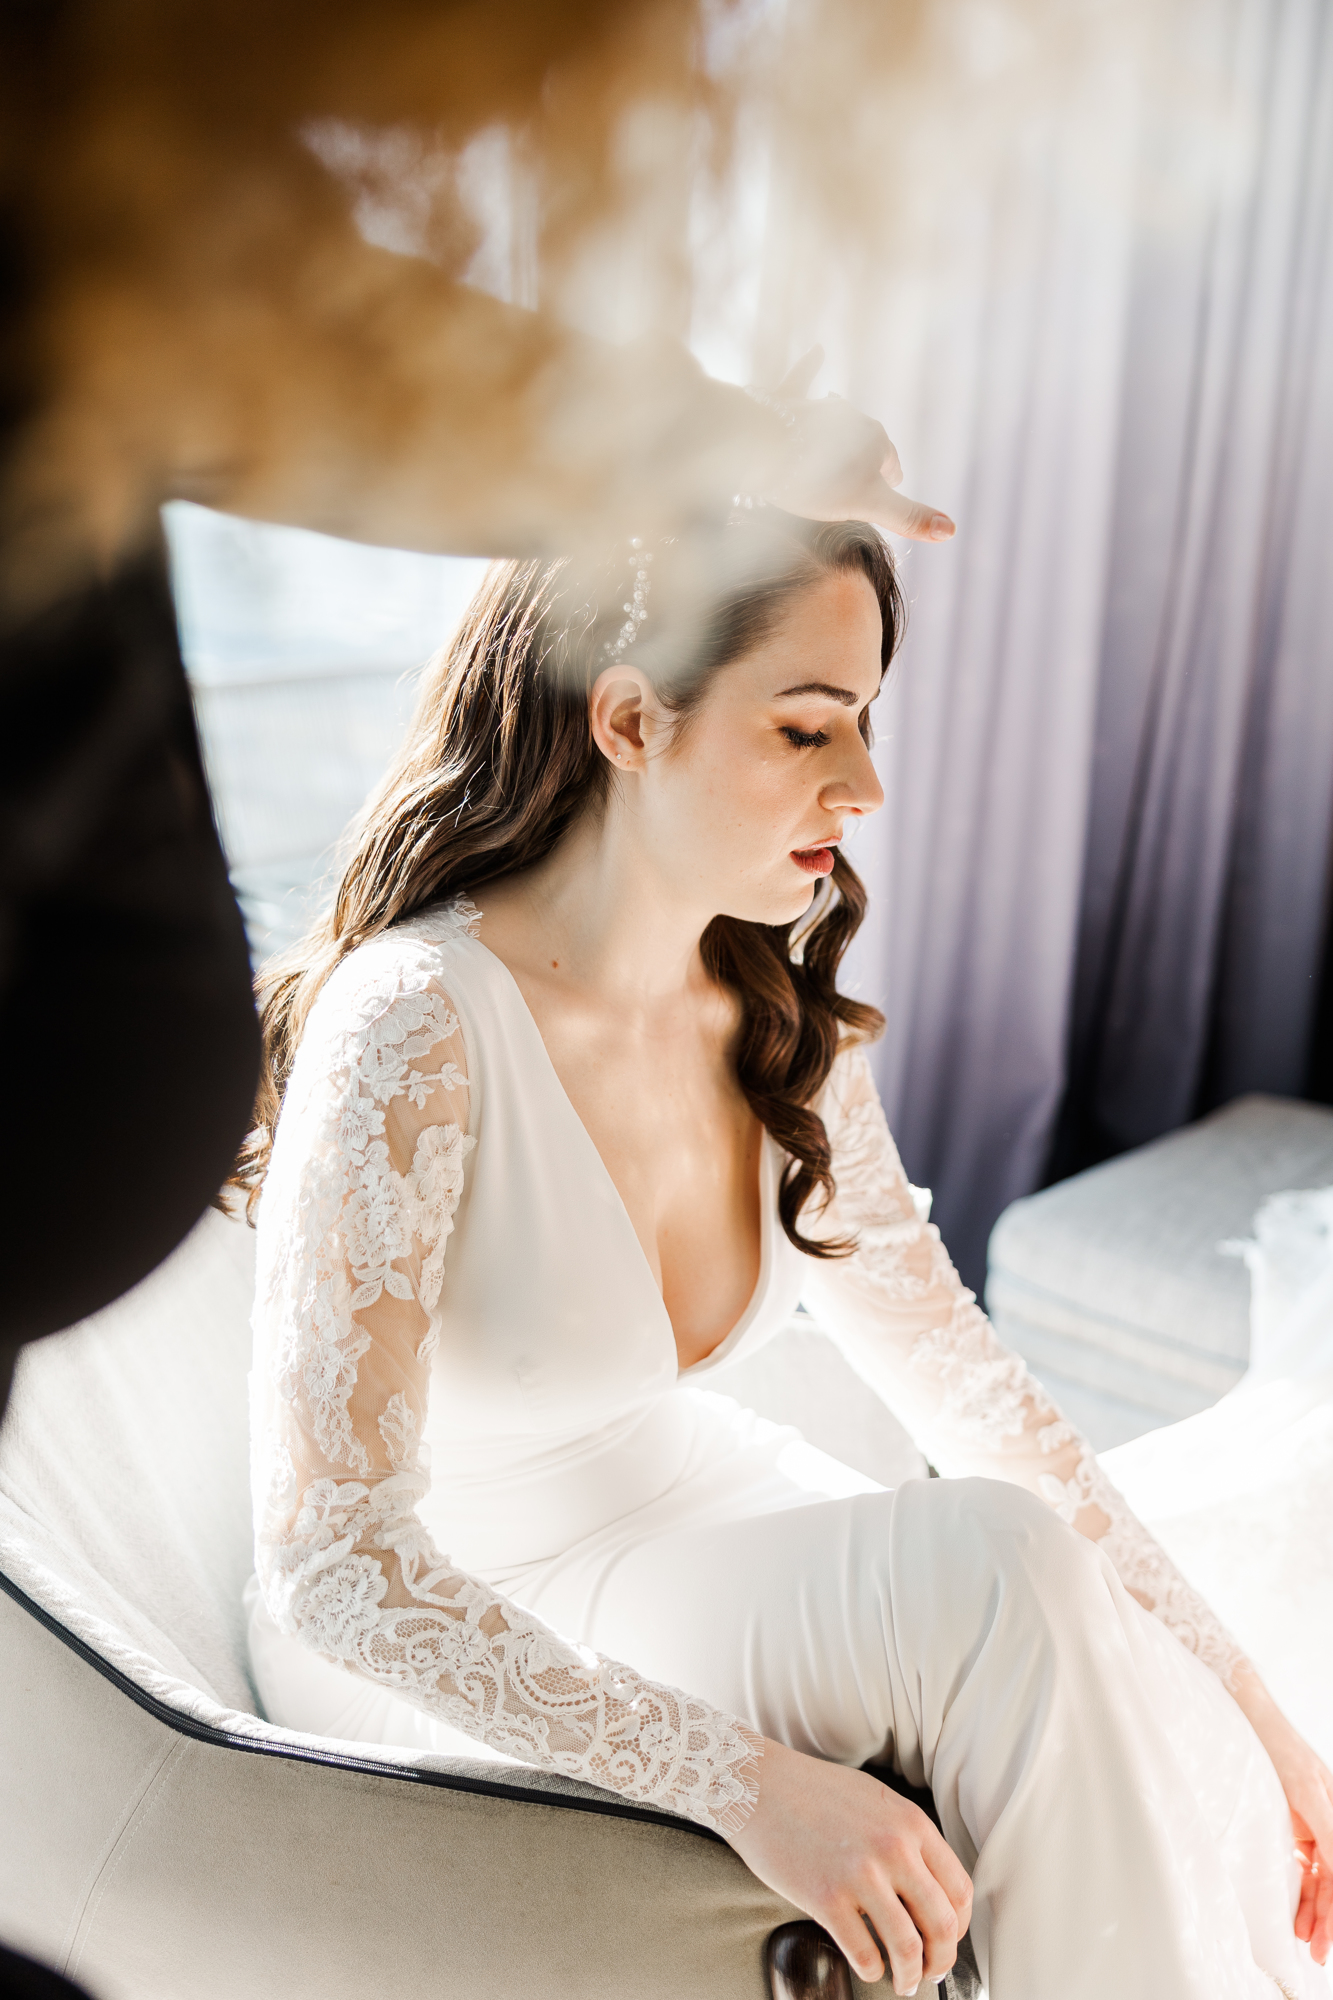 Candid Brooklyn Wedding Photography at 74Wythe with Rooftop NYC Views